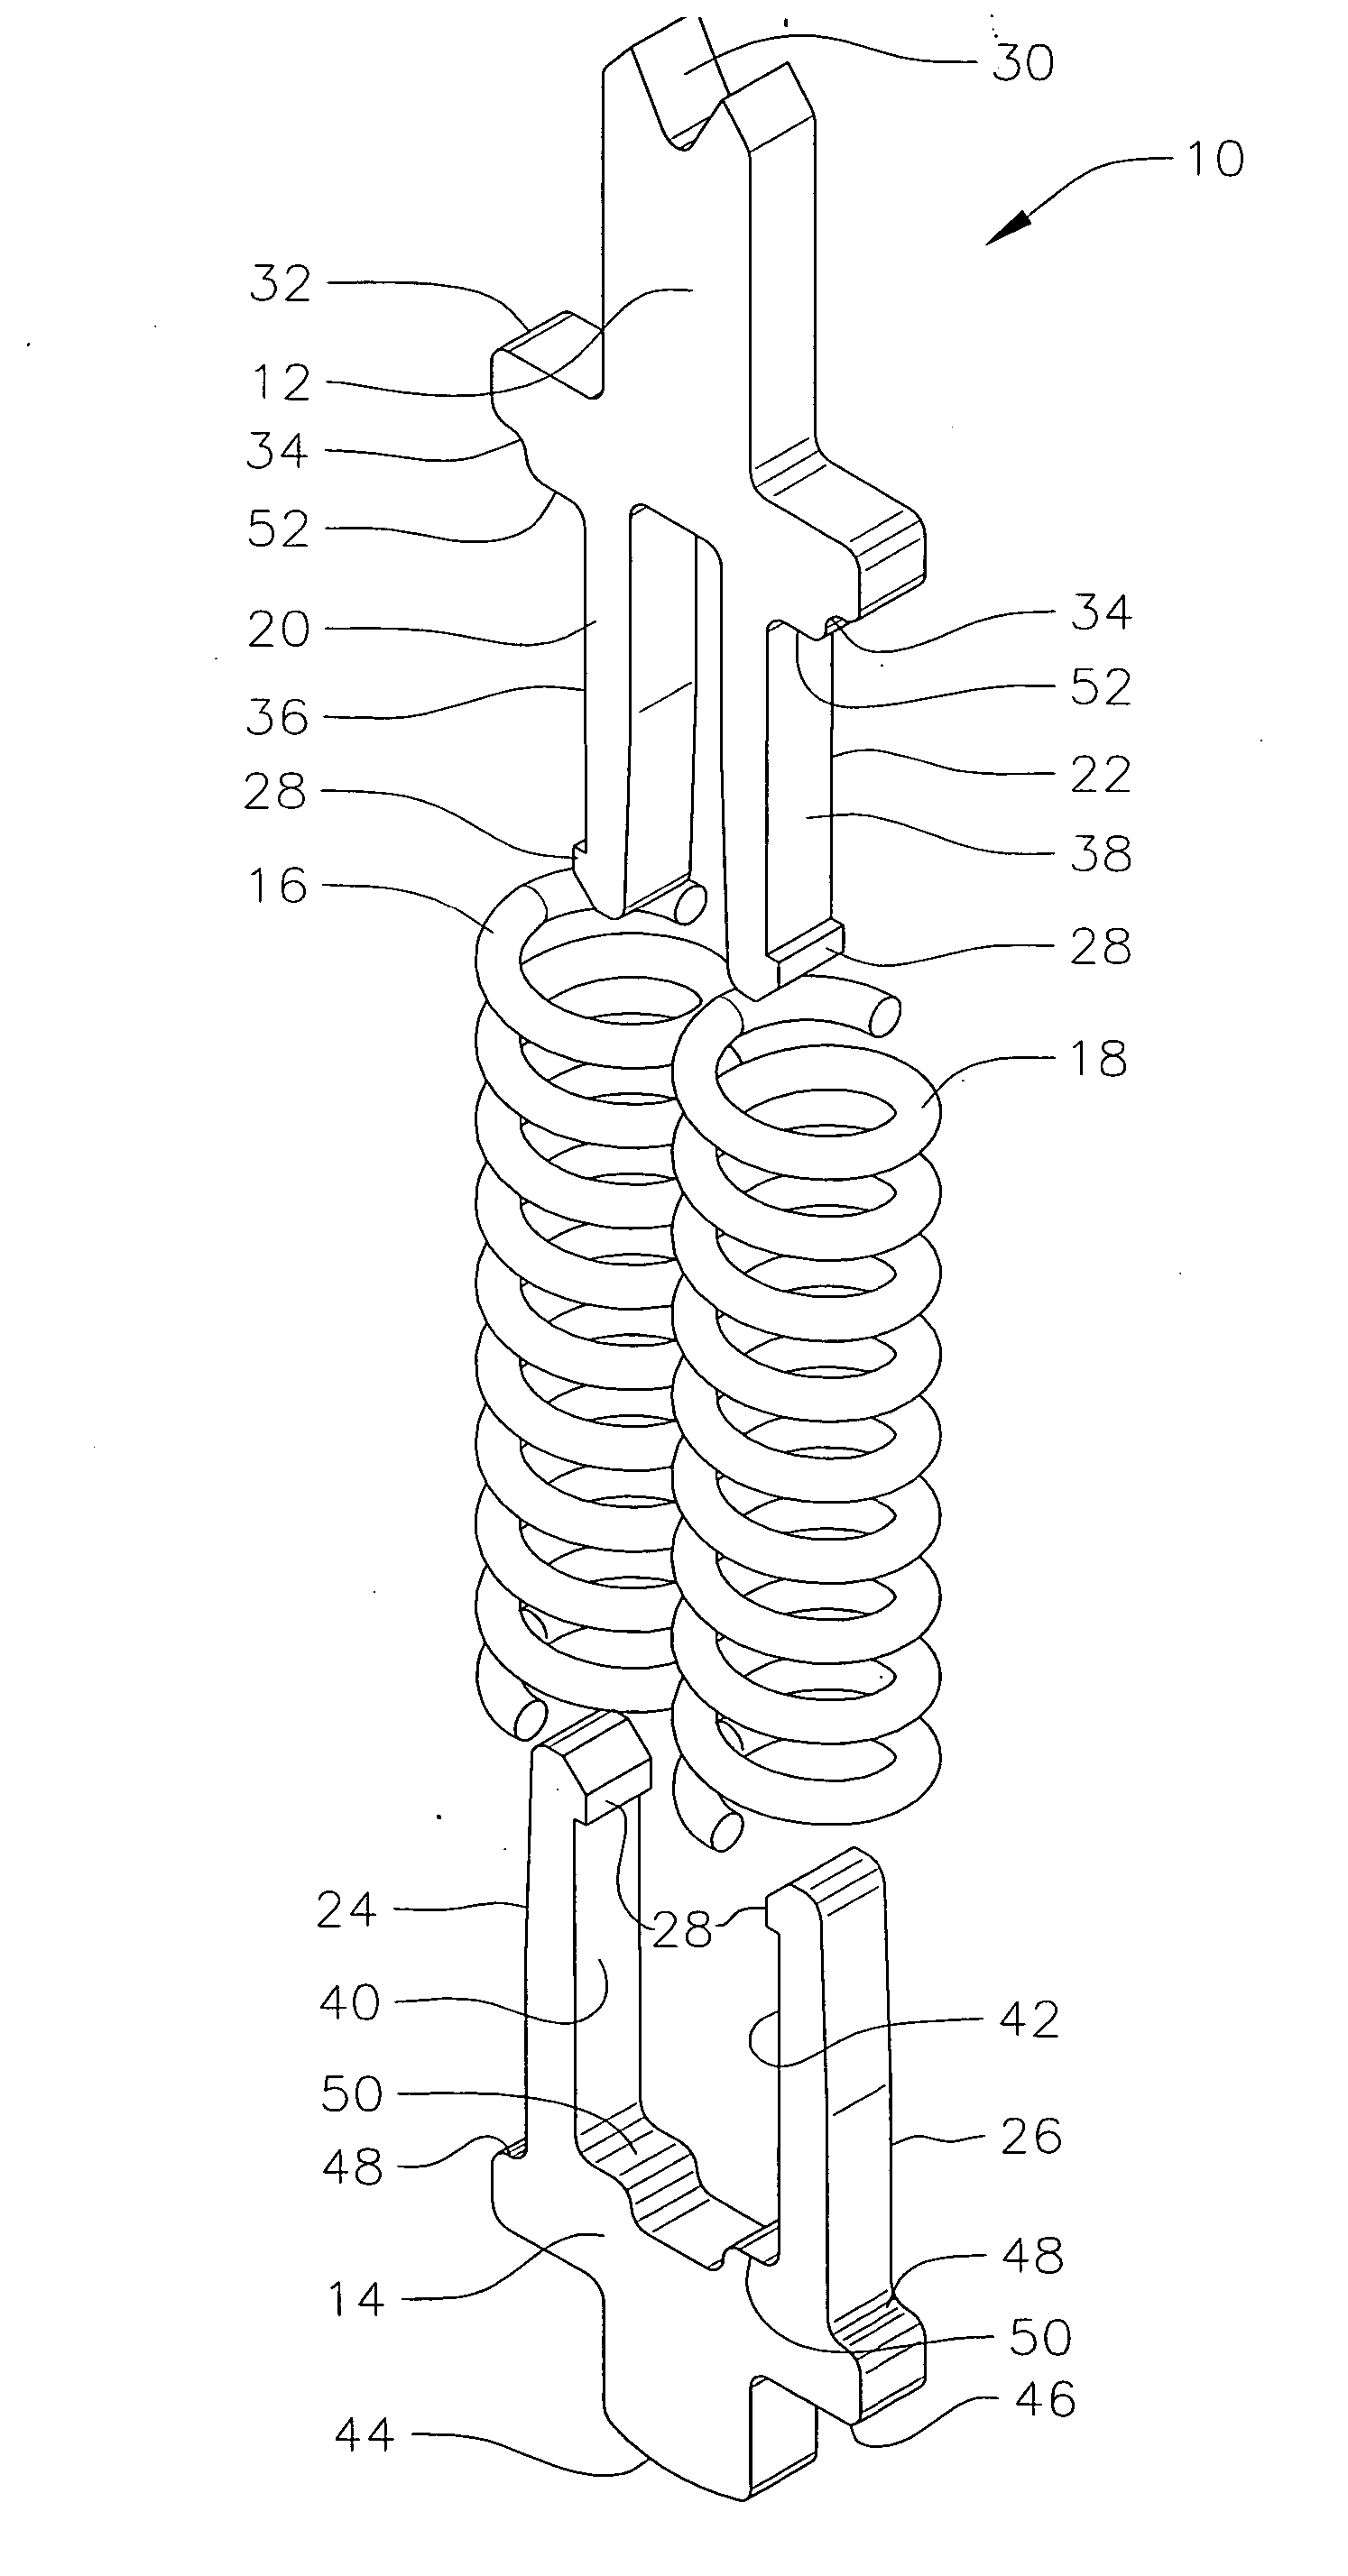 Electrical contact probe with compliant internal interconnect